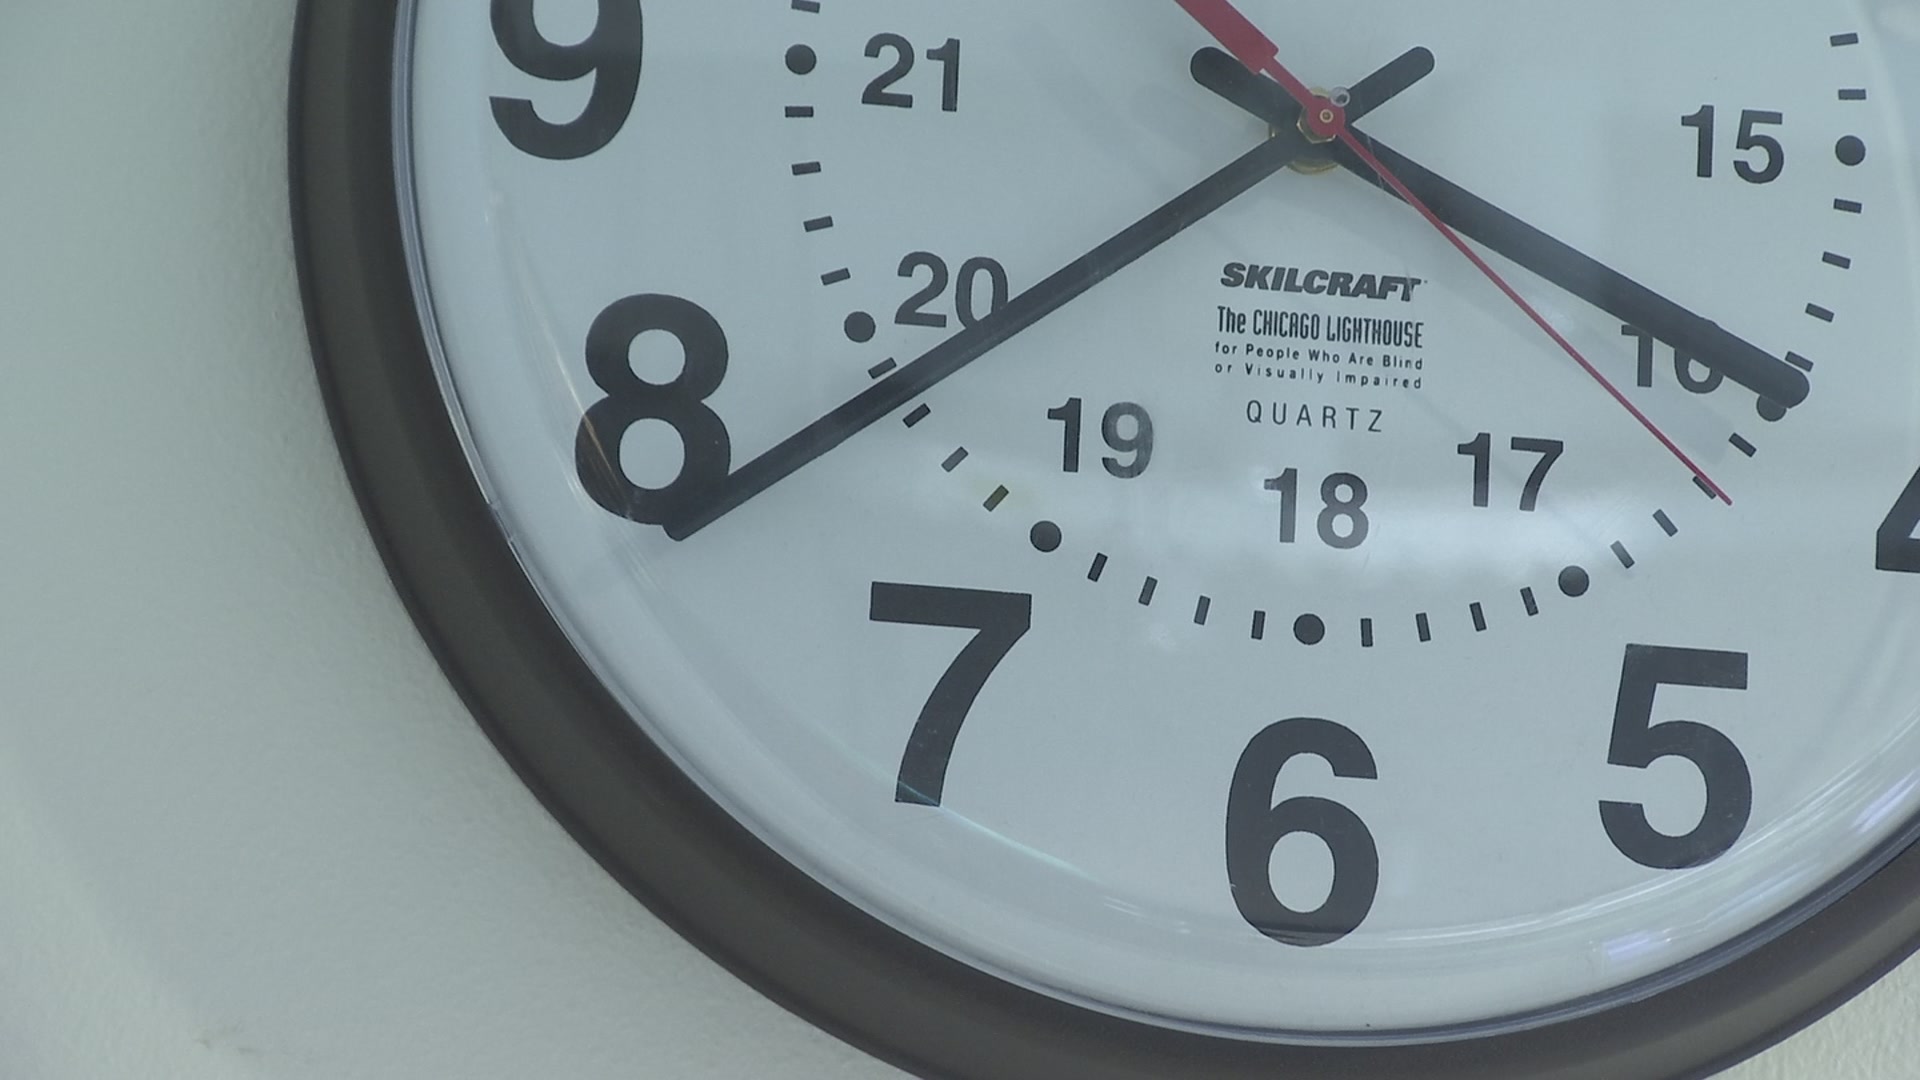 Daylight Saving Time may create a literal headache for you. Here's why -  CBS Baltimore